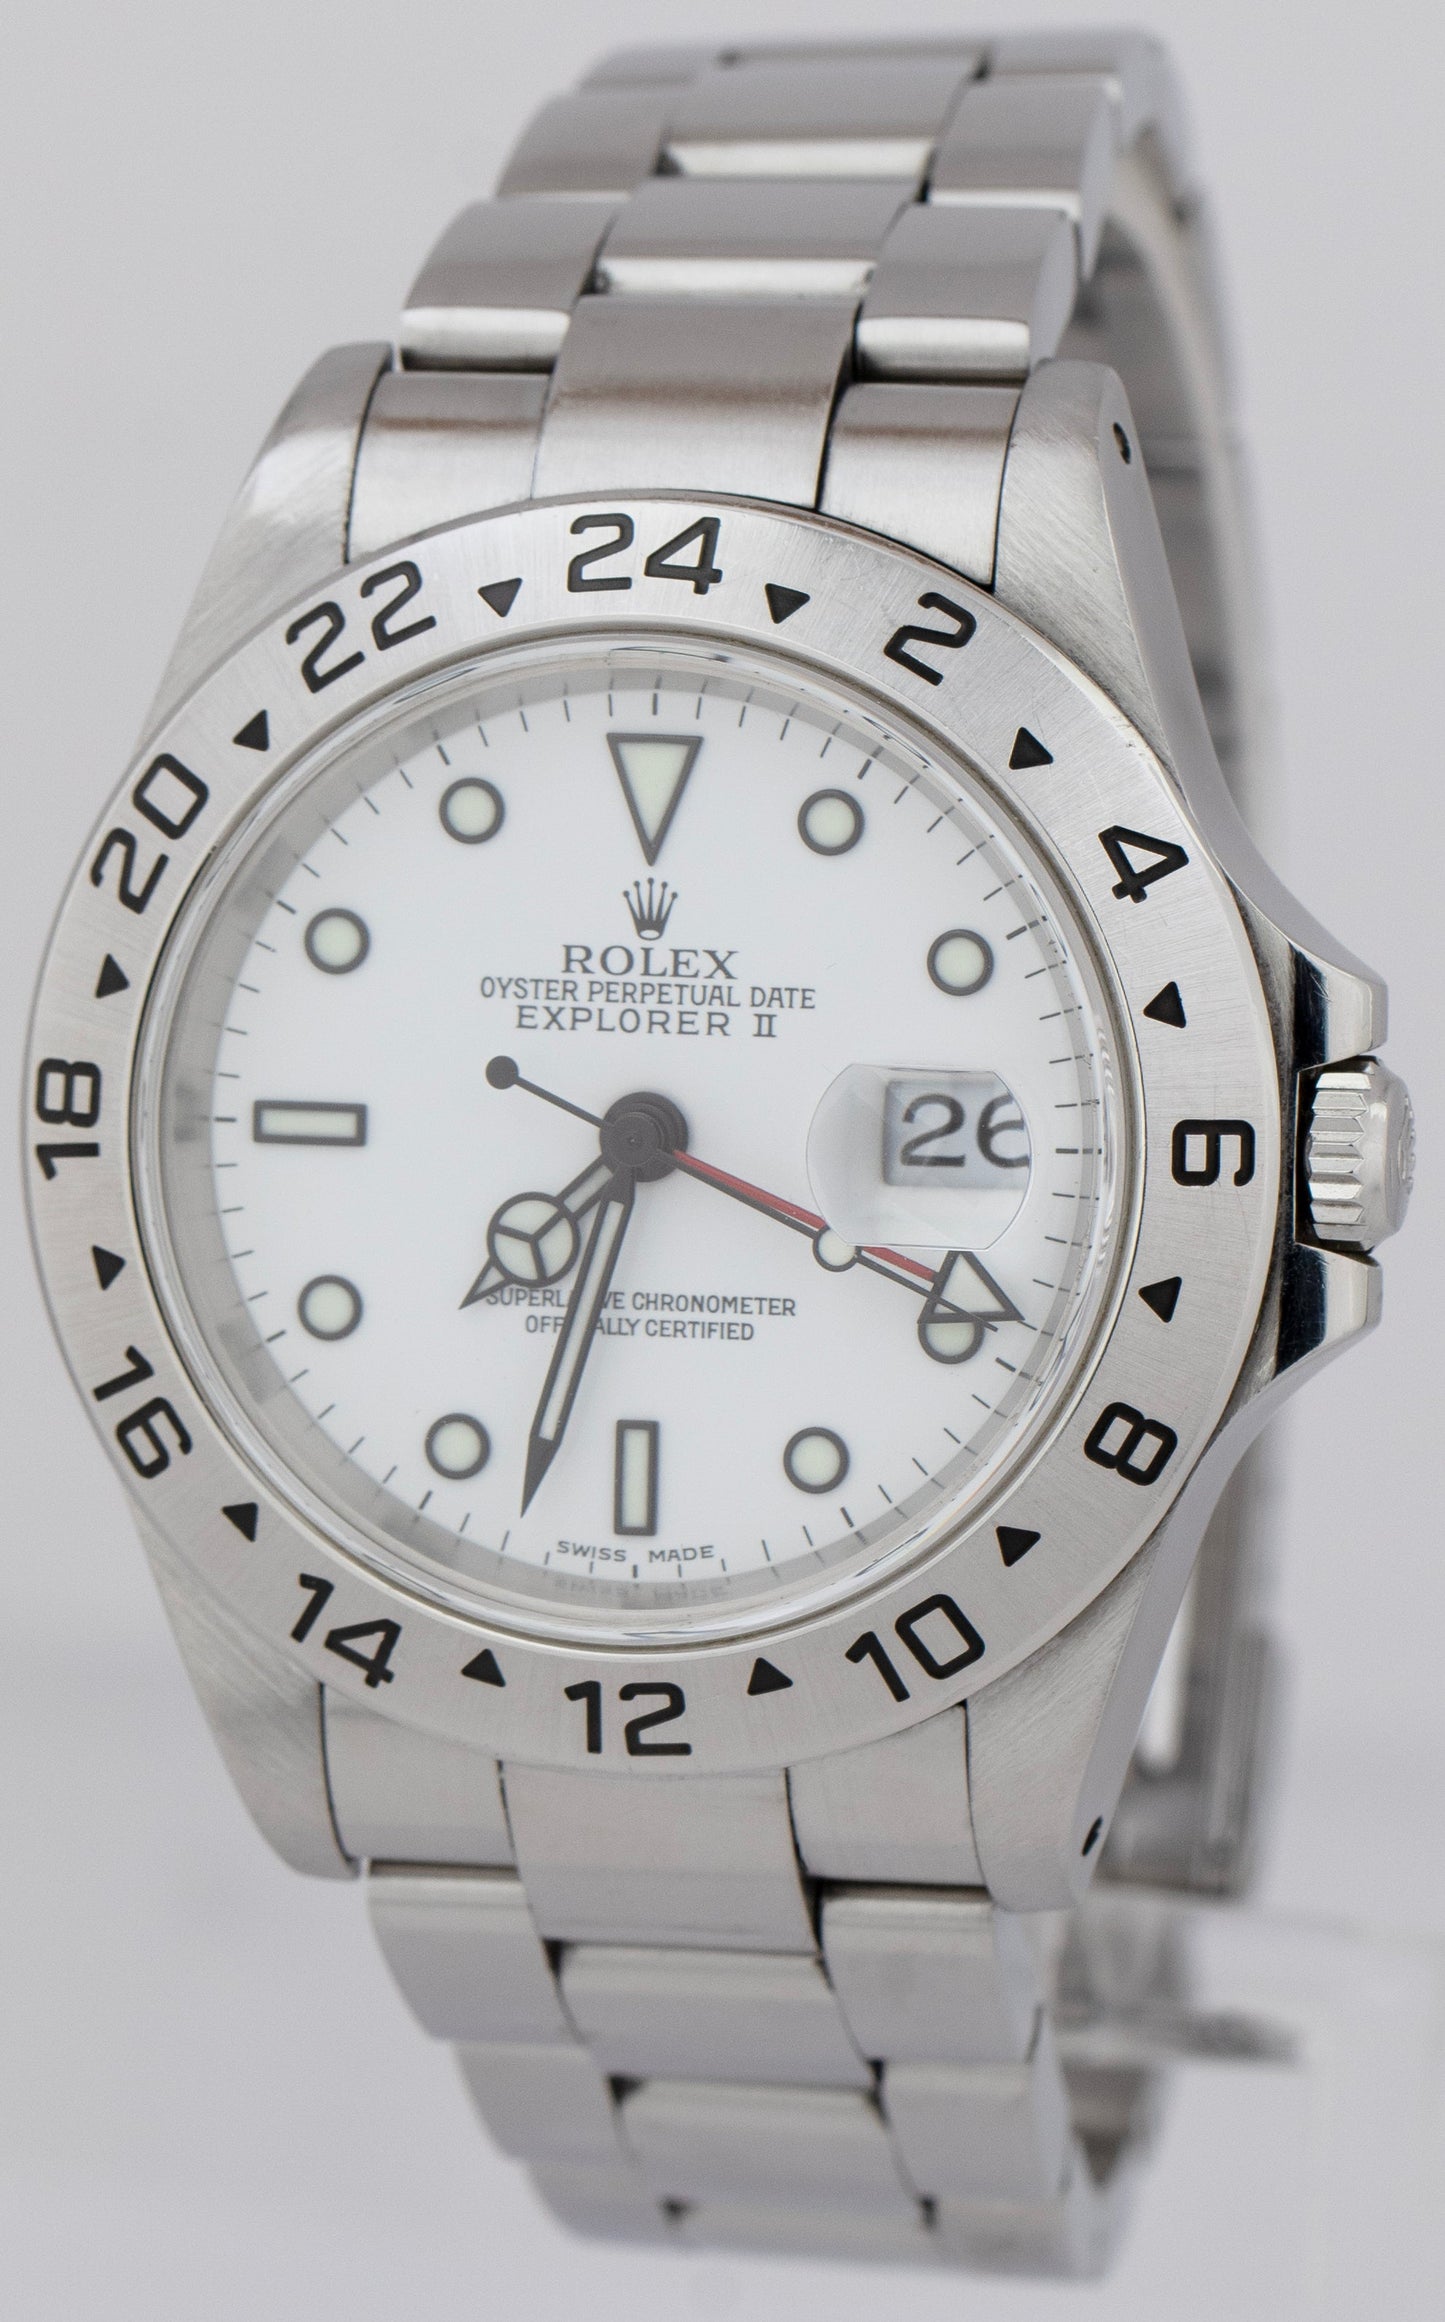 2000 Rolex Explorer II Polar White Stainless Automatic GMT 40mm Watch 16570 B+P